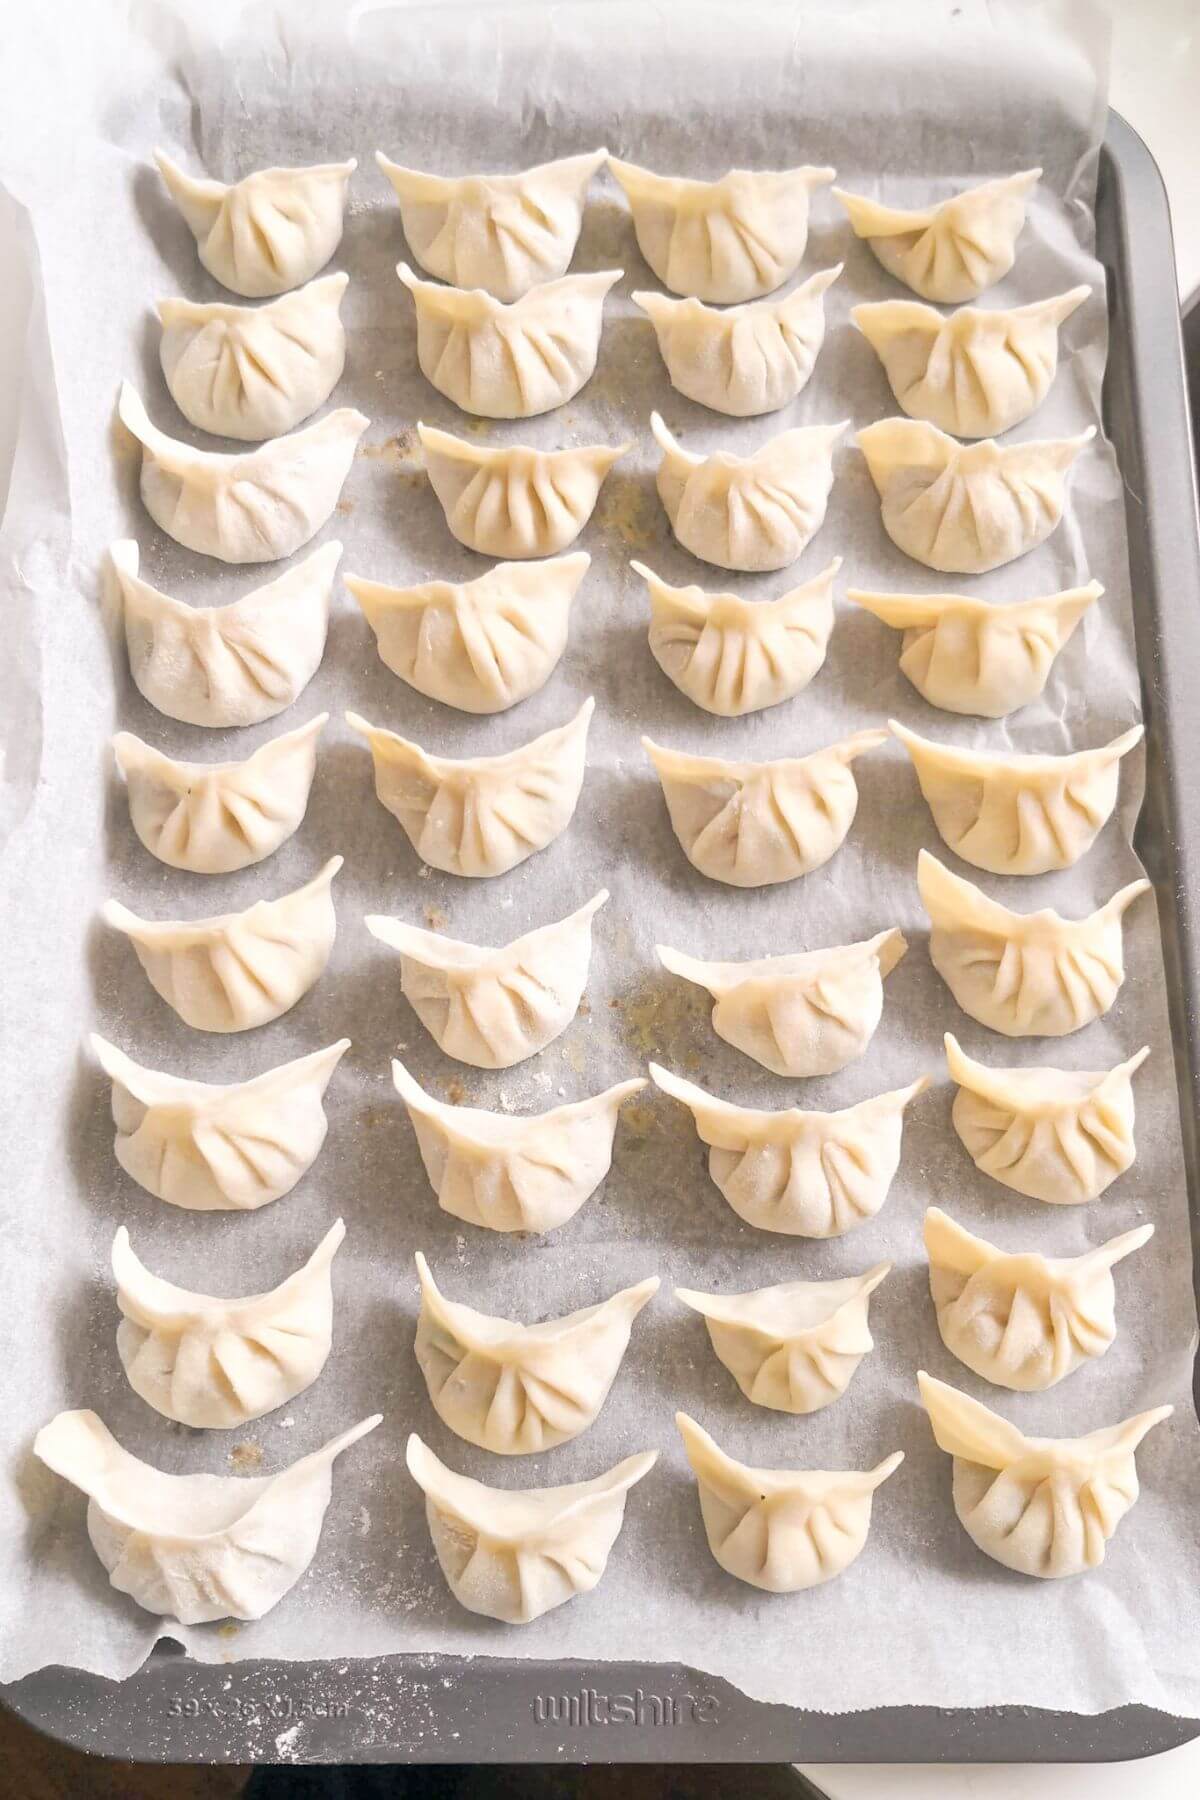 Dumplings laid out on a lined baking tray.